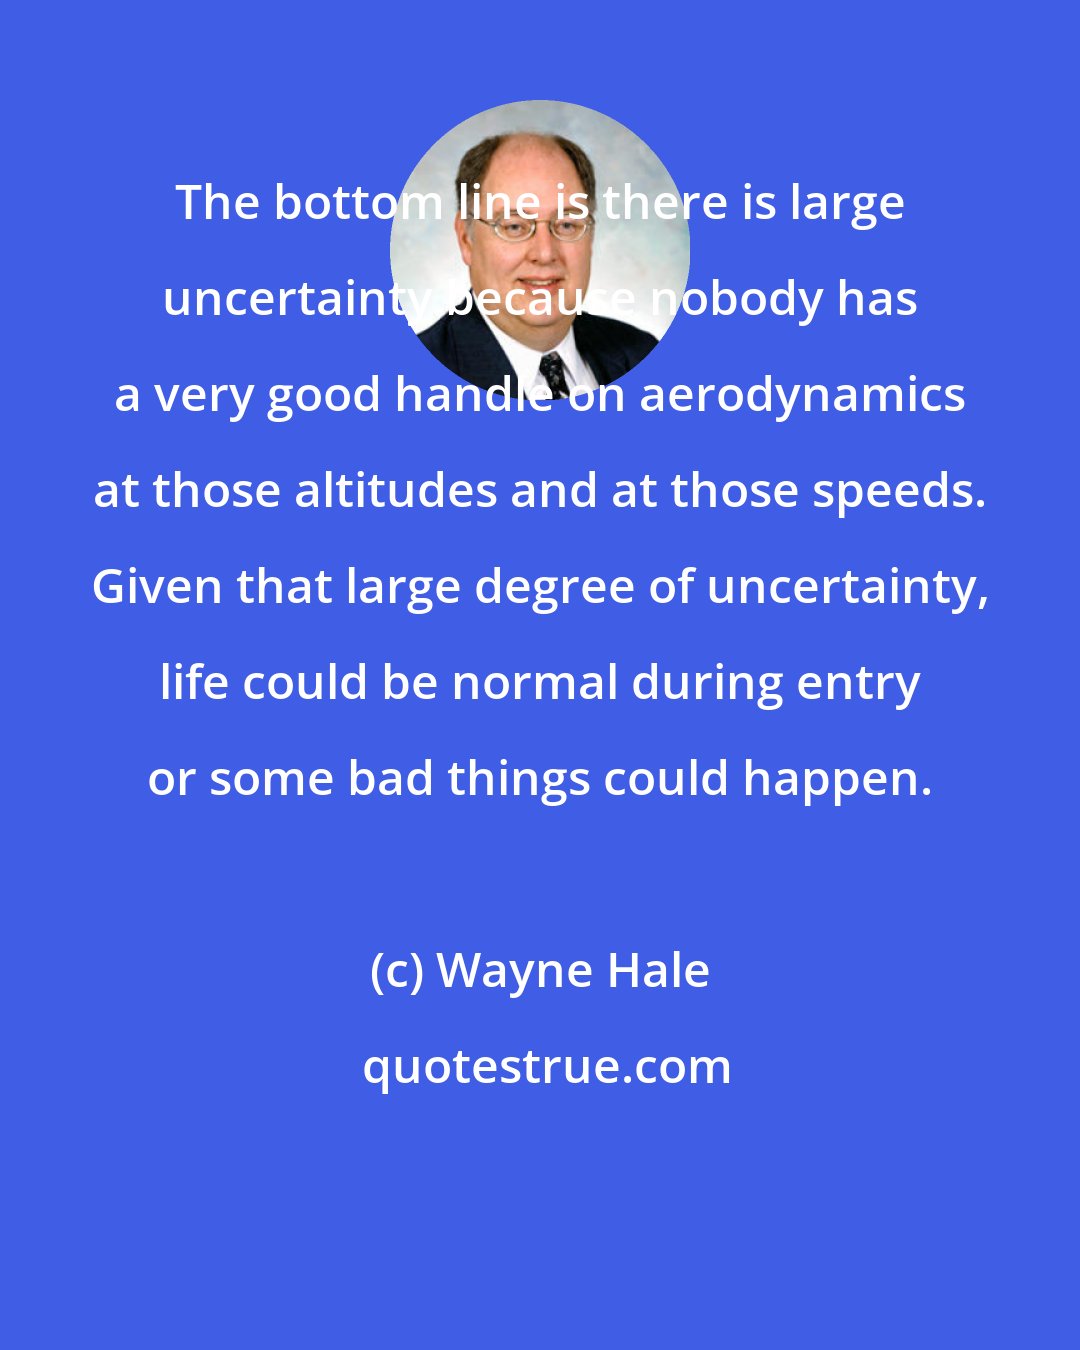 Wayne Hale: The bottom line is there is large uncertainty because nobody has a very good handle on aerodynamics at those altitudes and at those speeds. Given that large degree of uncertainty, life could be normal during entry or some bad things could happen.